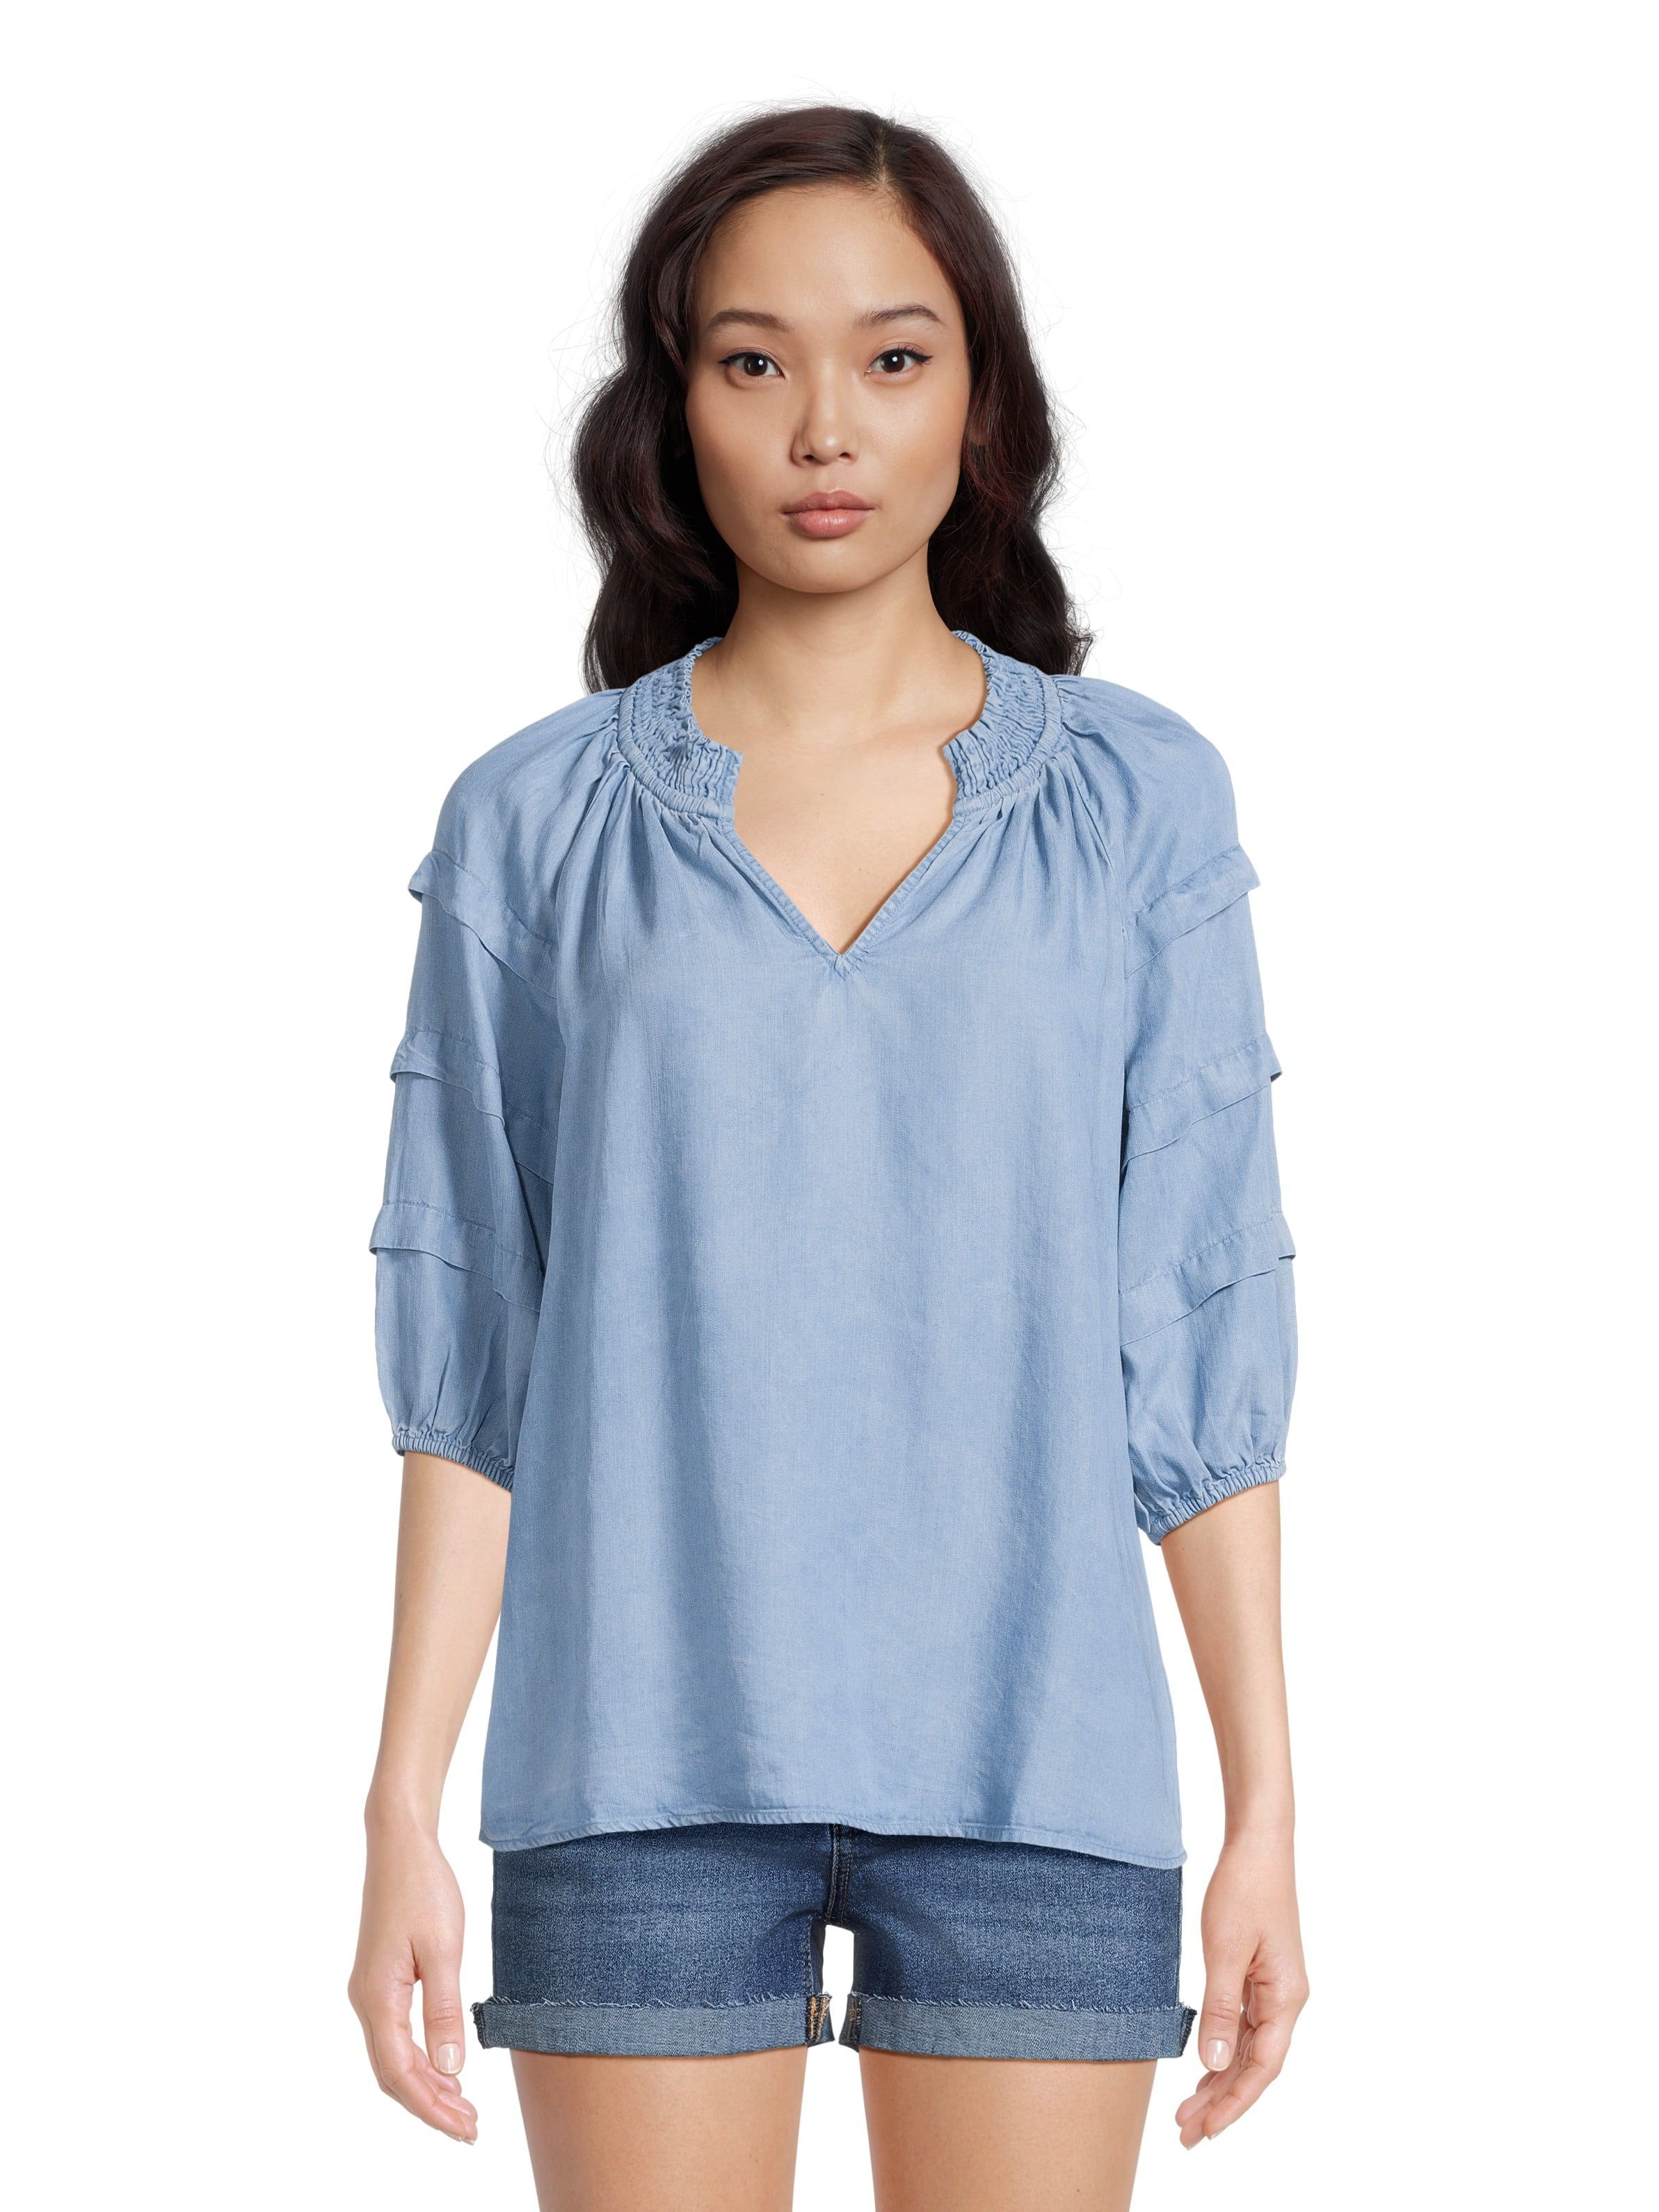 The Pioneer Woman Smocked Collar Peasant Blouse with 3/4-Length Sleeves, Women's, Sizes XS-3X | Walmart (US)